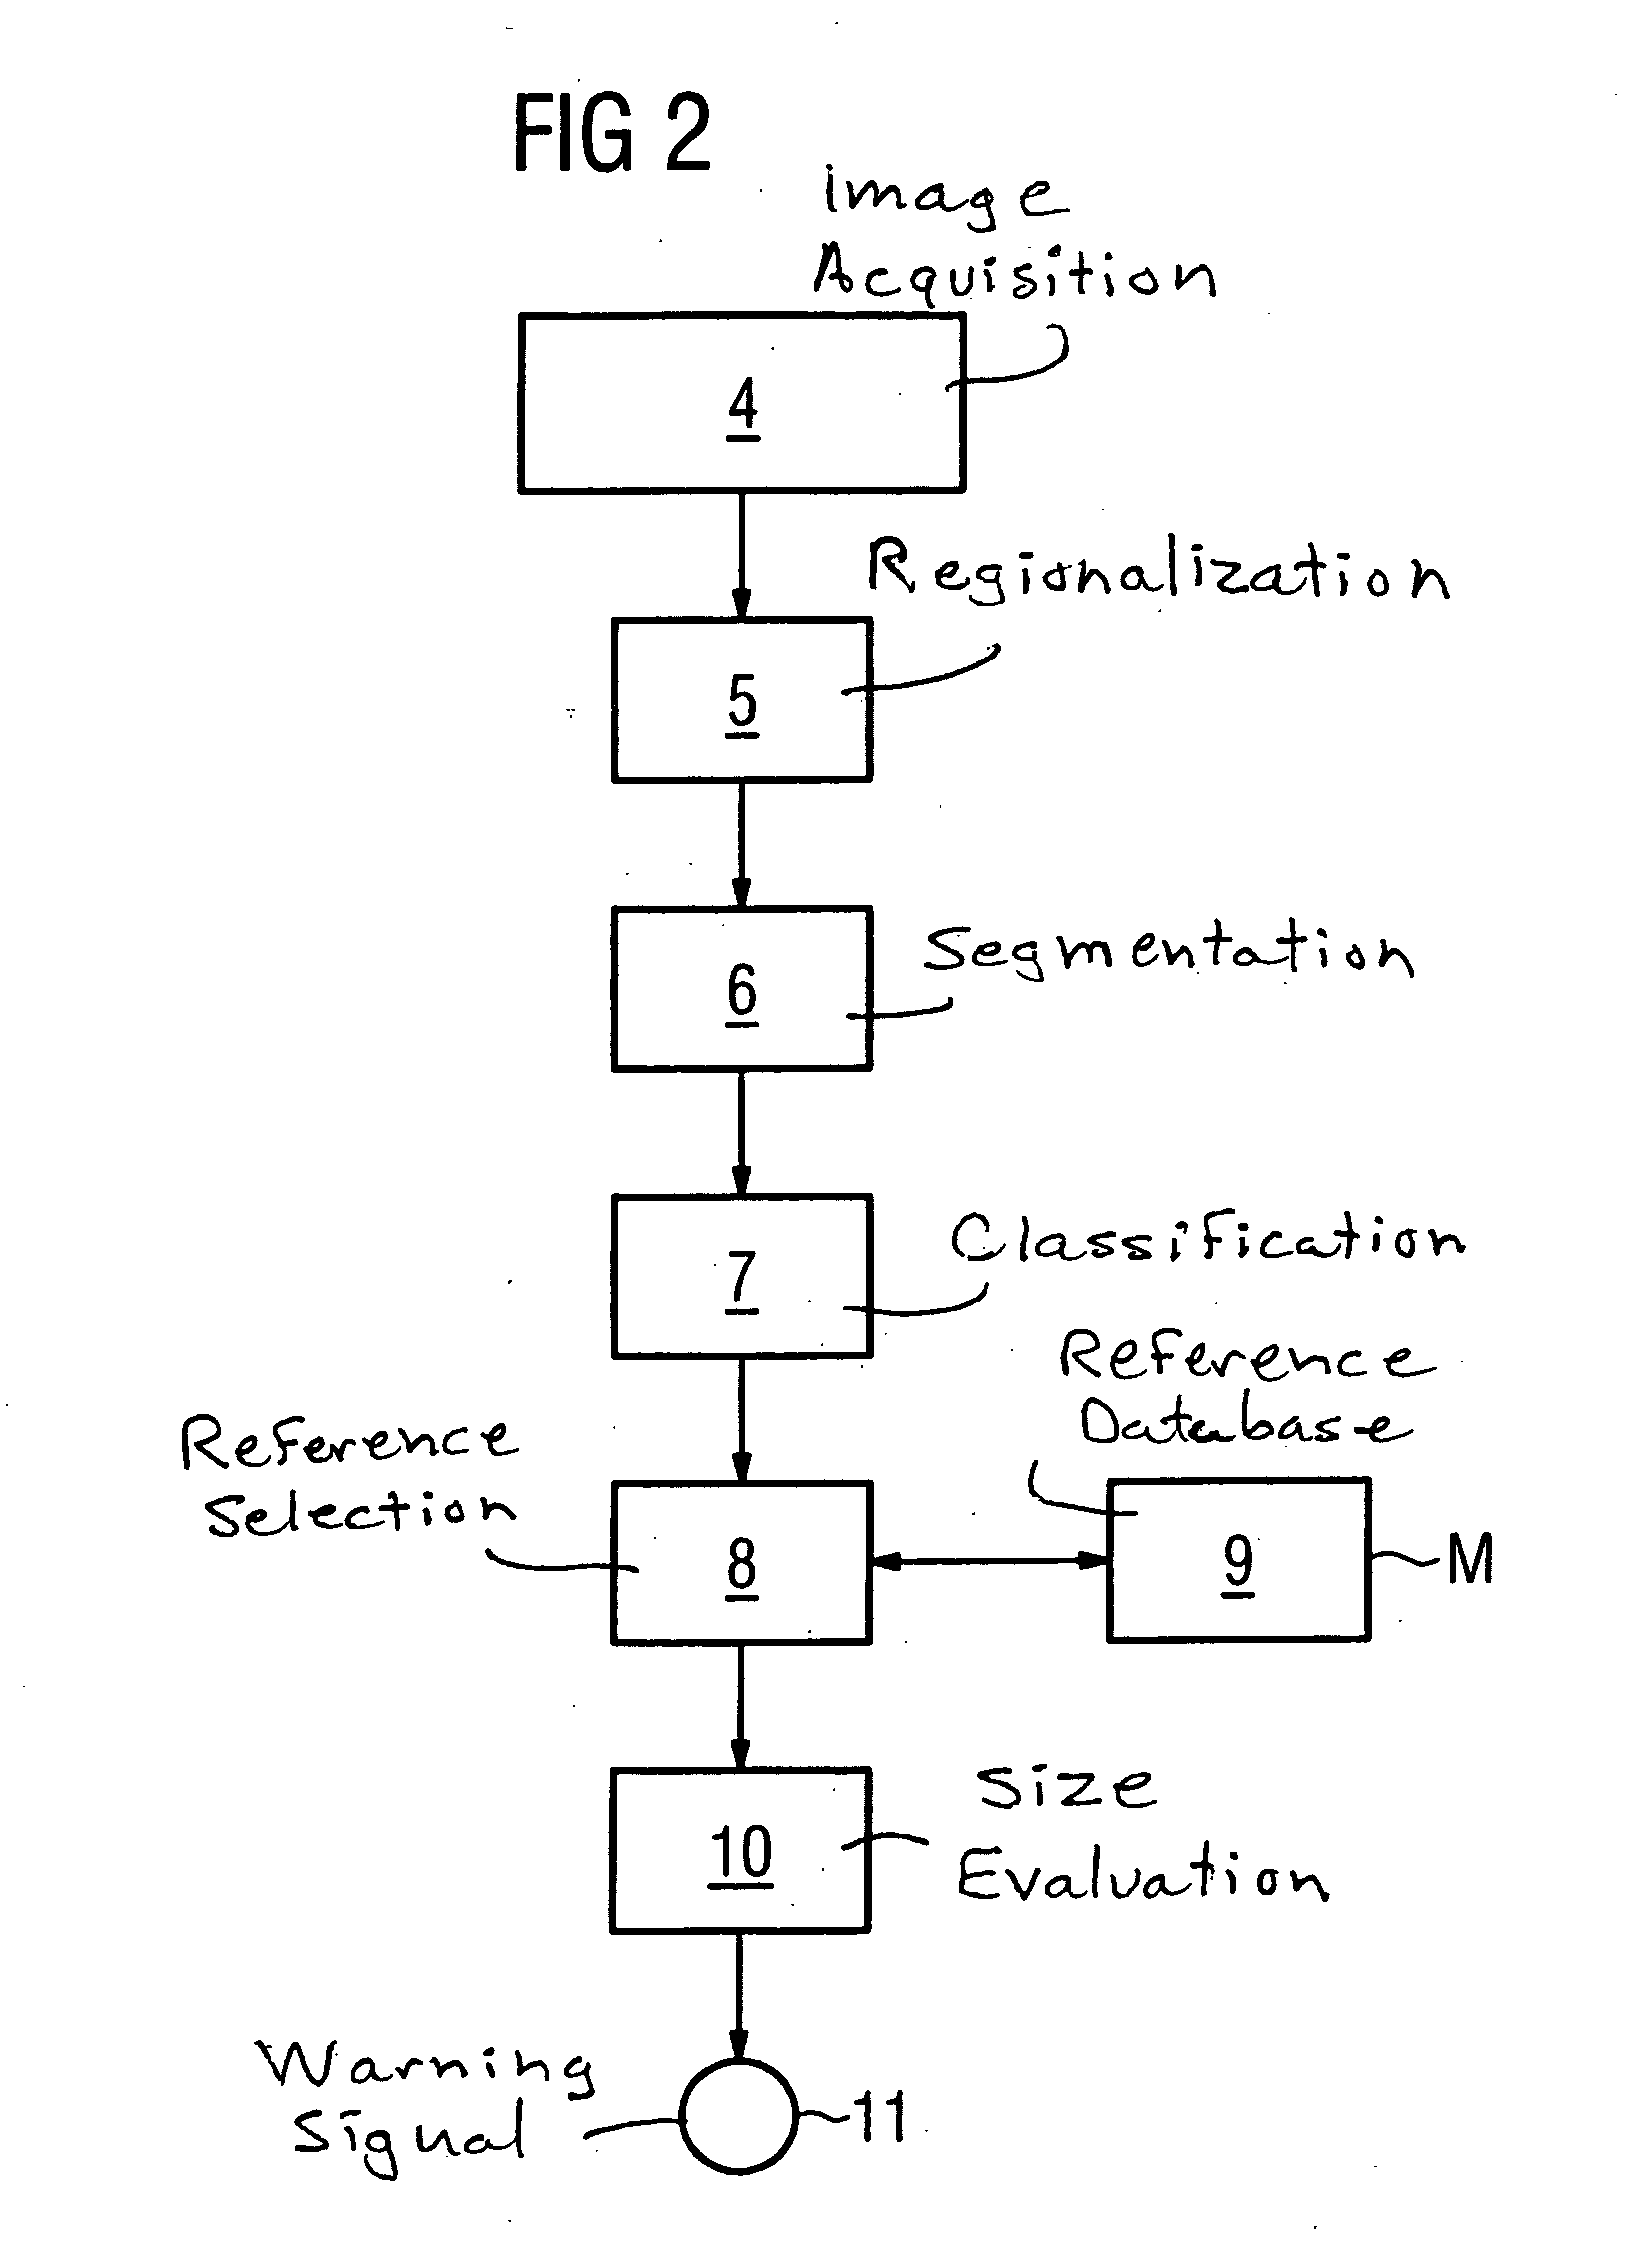 Method for the automatic scaling verification of an image, in particular a patient image